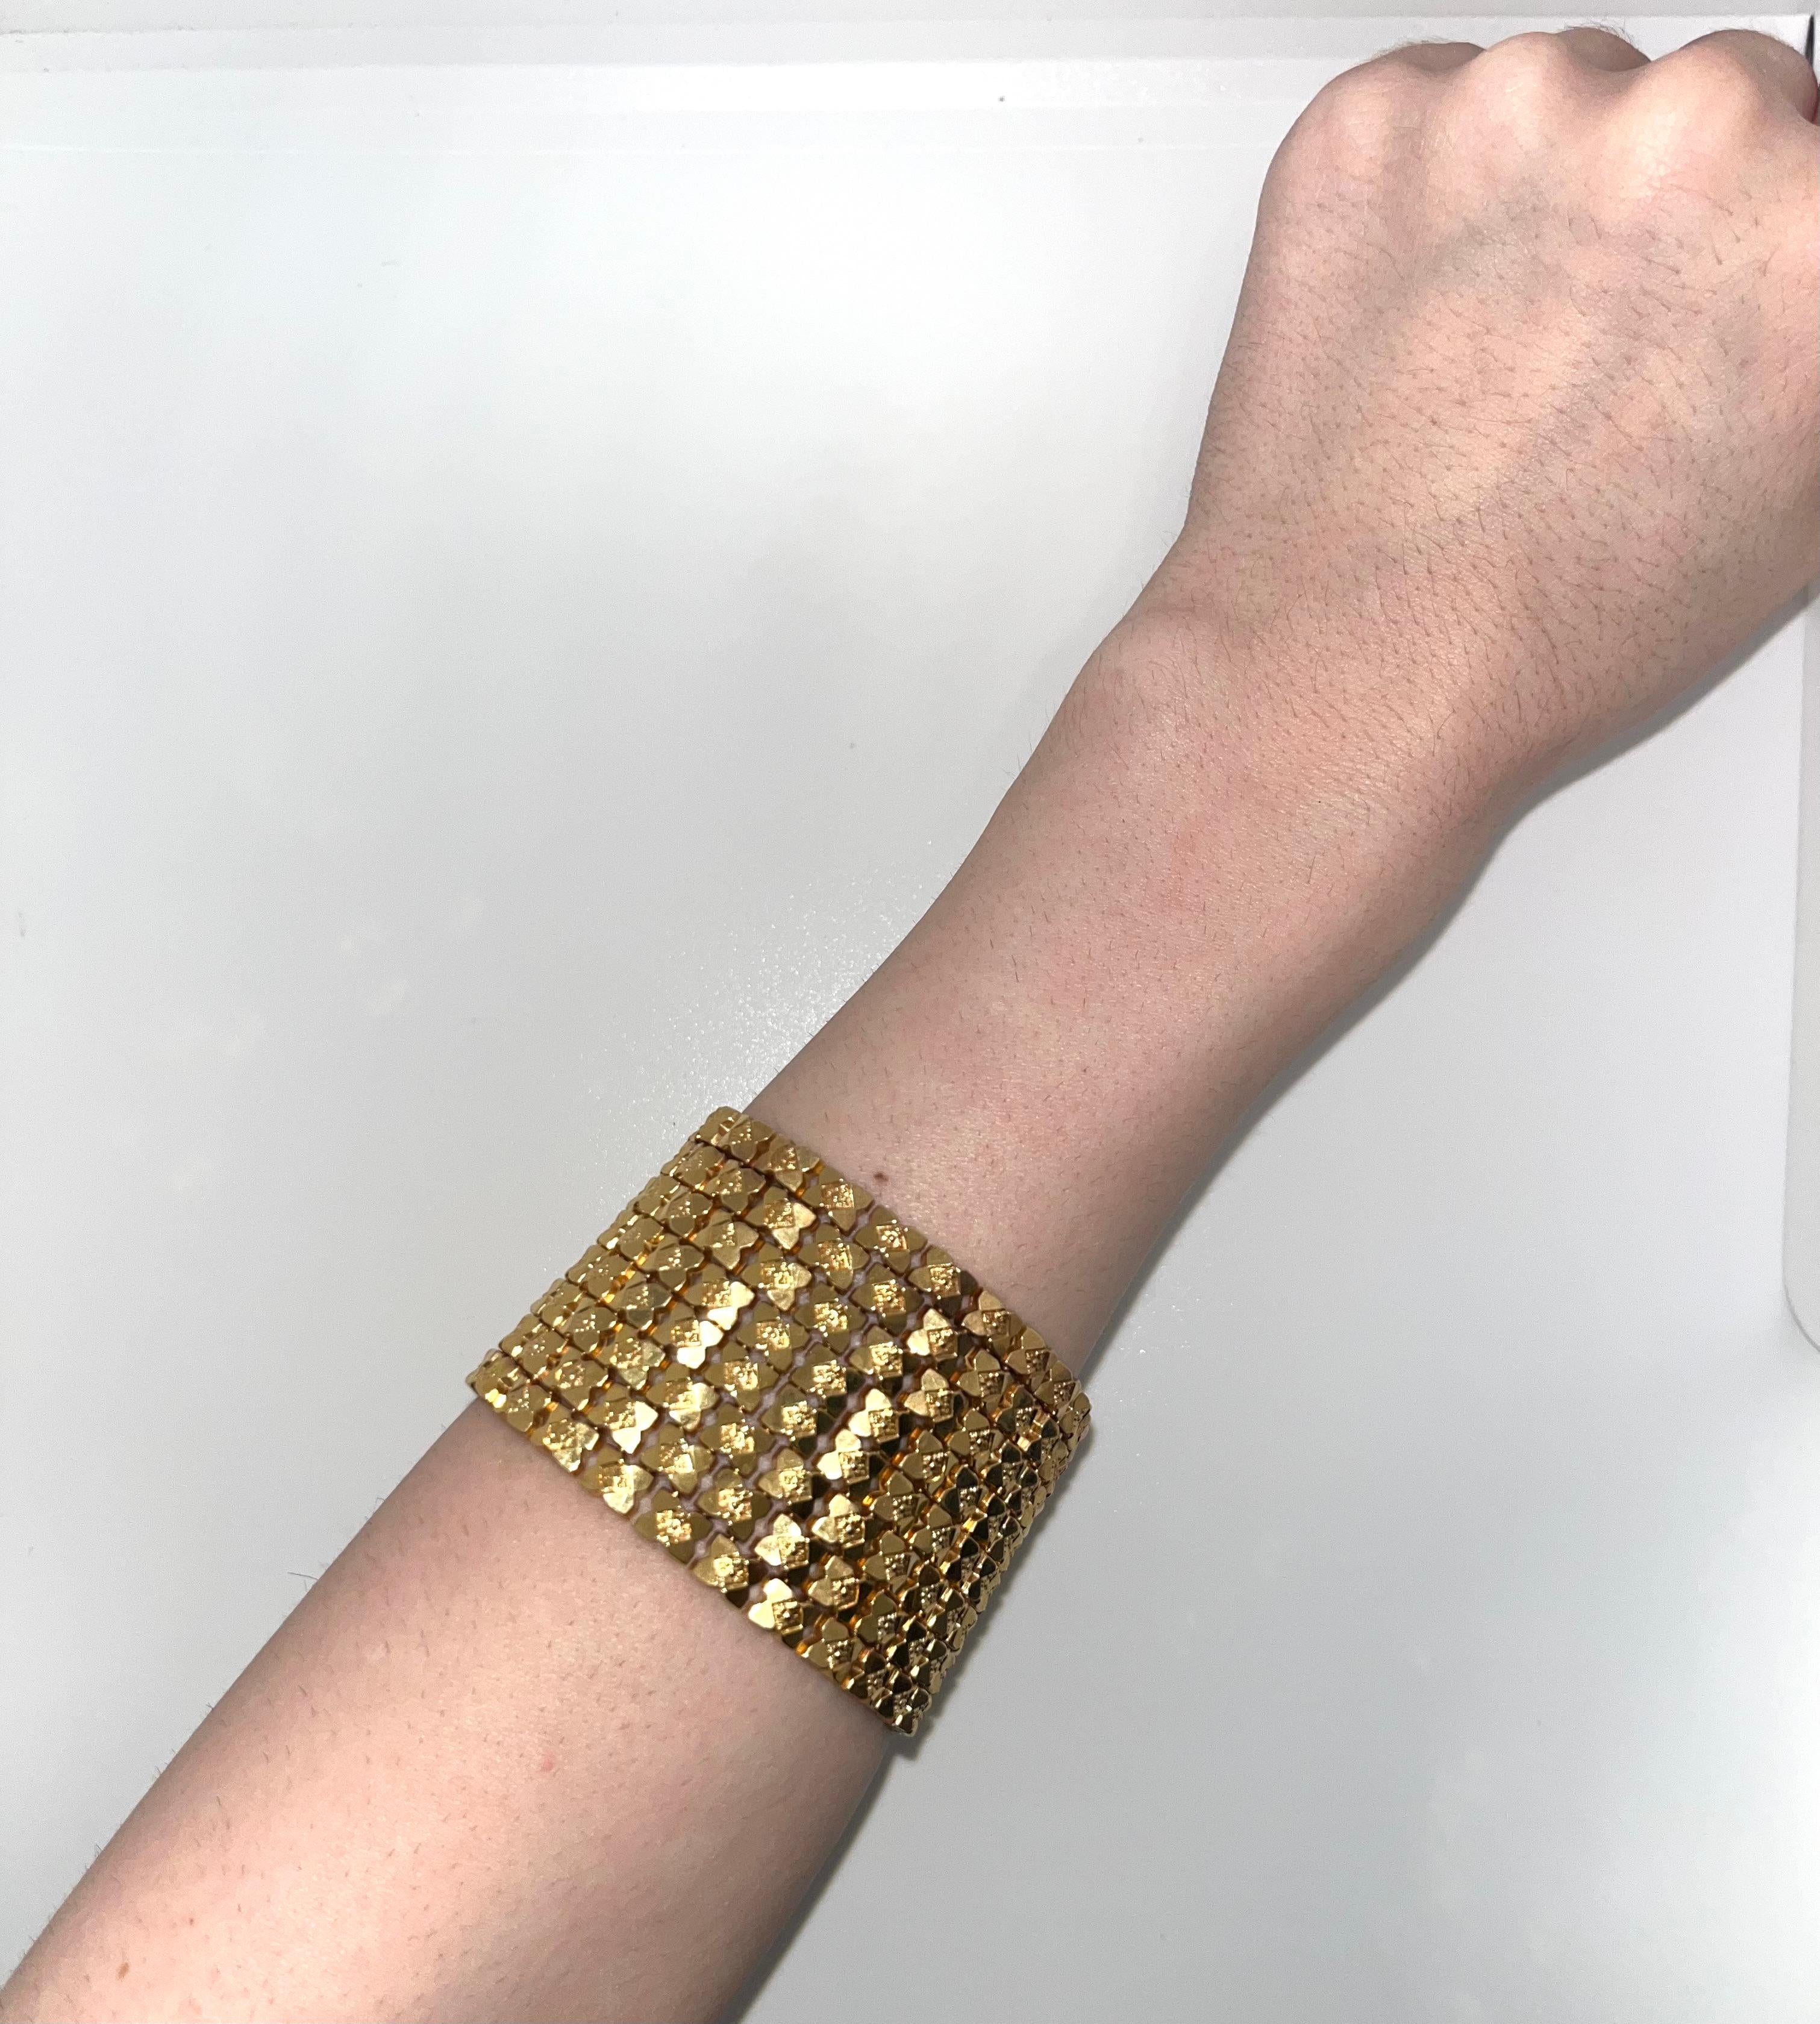 An exquisite piece from the glamorous 1960s, this Cleopatra bracelet exudes timeless elegance and opulence. Crafted from luxurious 18k yellow gold, the bracelet boasts an impressive width of 1.75 inches, spanning eight sumptuous links across the